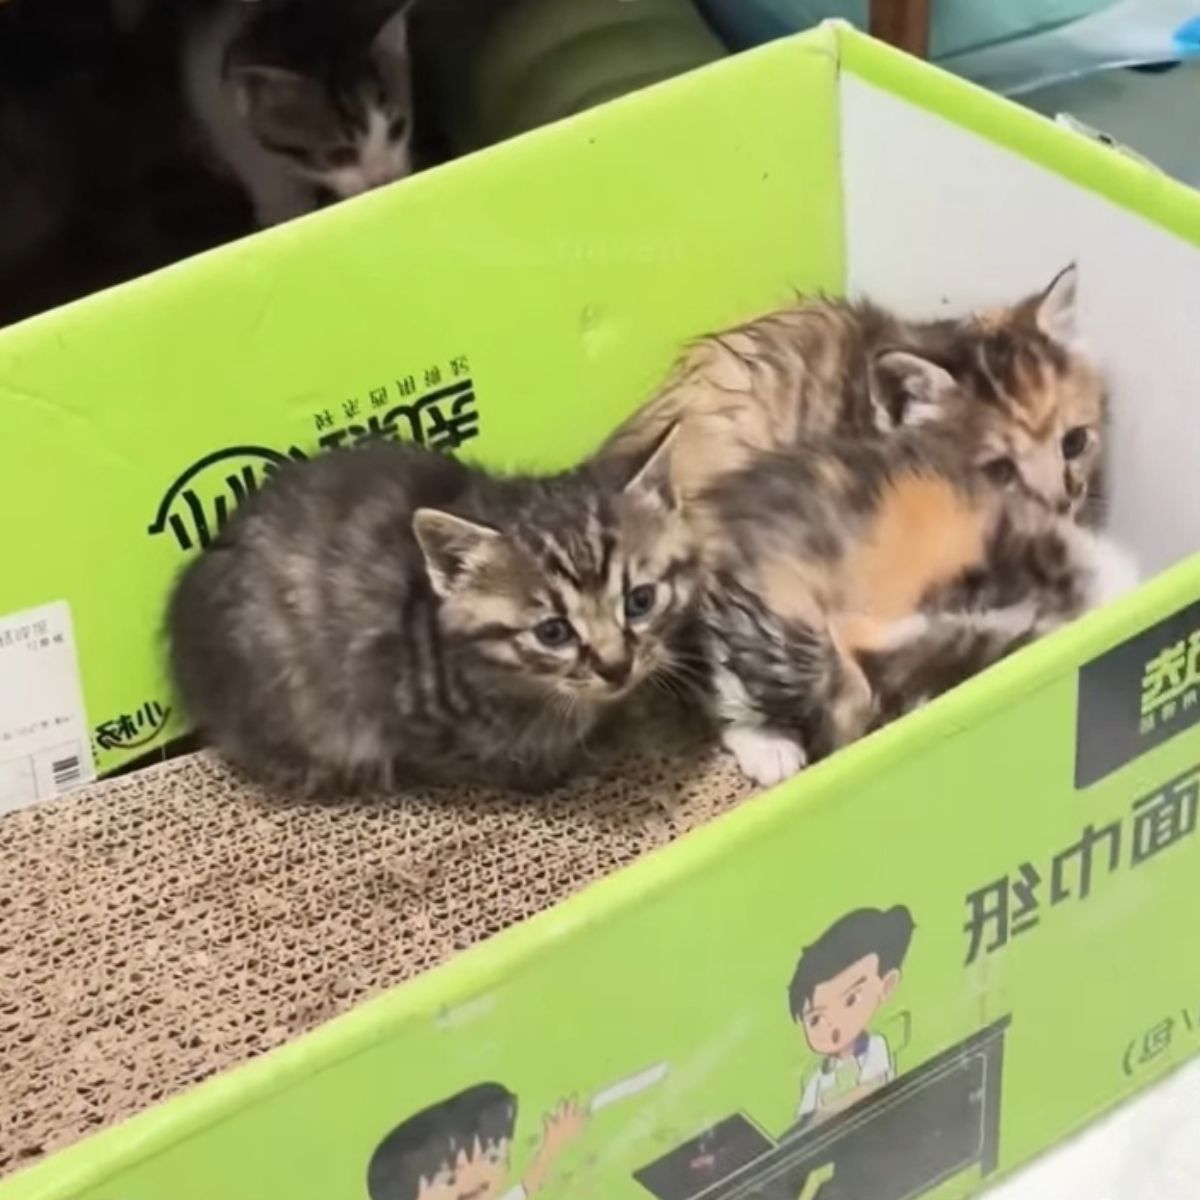 kittens in a box